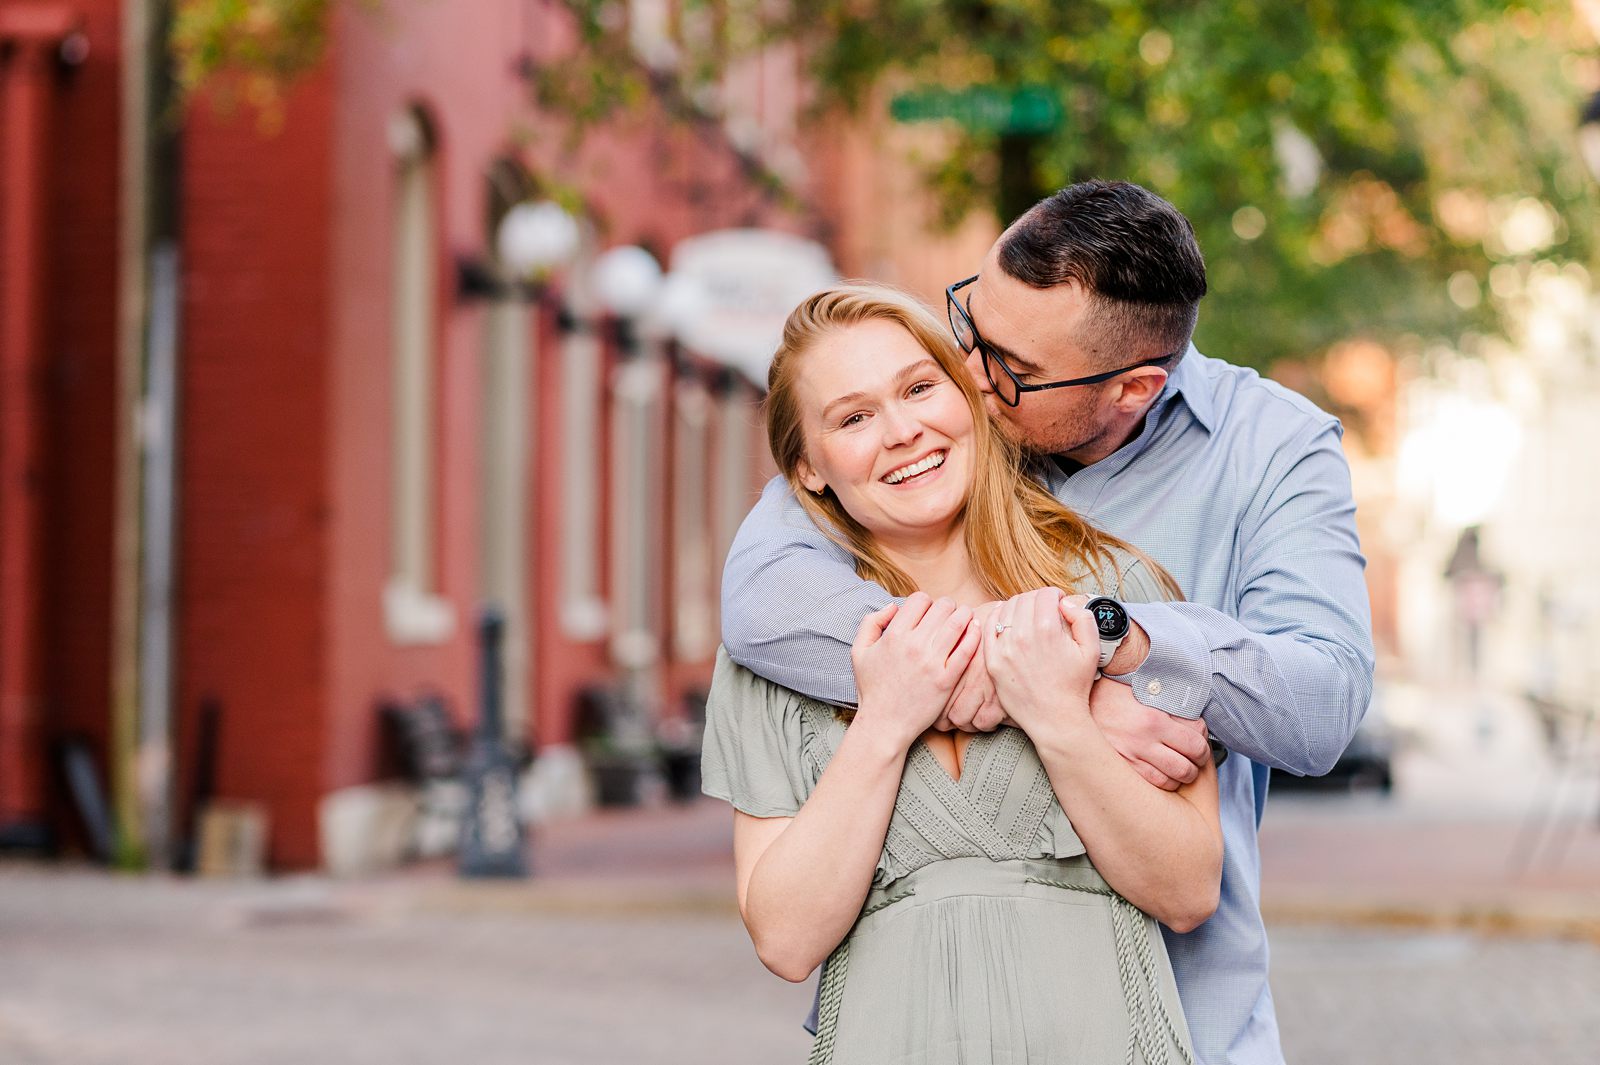 Downtown Richmond Engagement Session by Urban Farmhouse. Wedding Photographer Kailey Brianne Photography